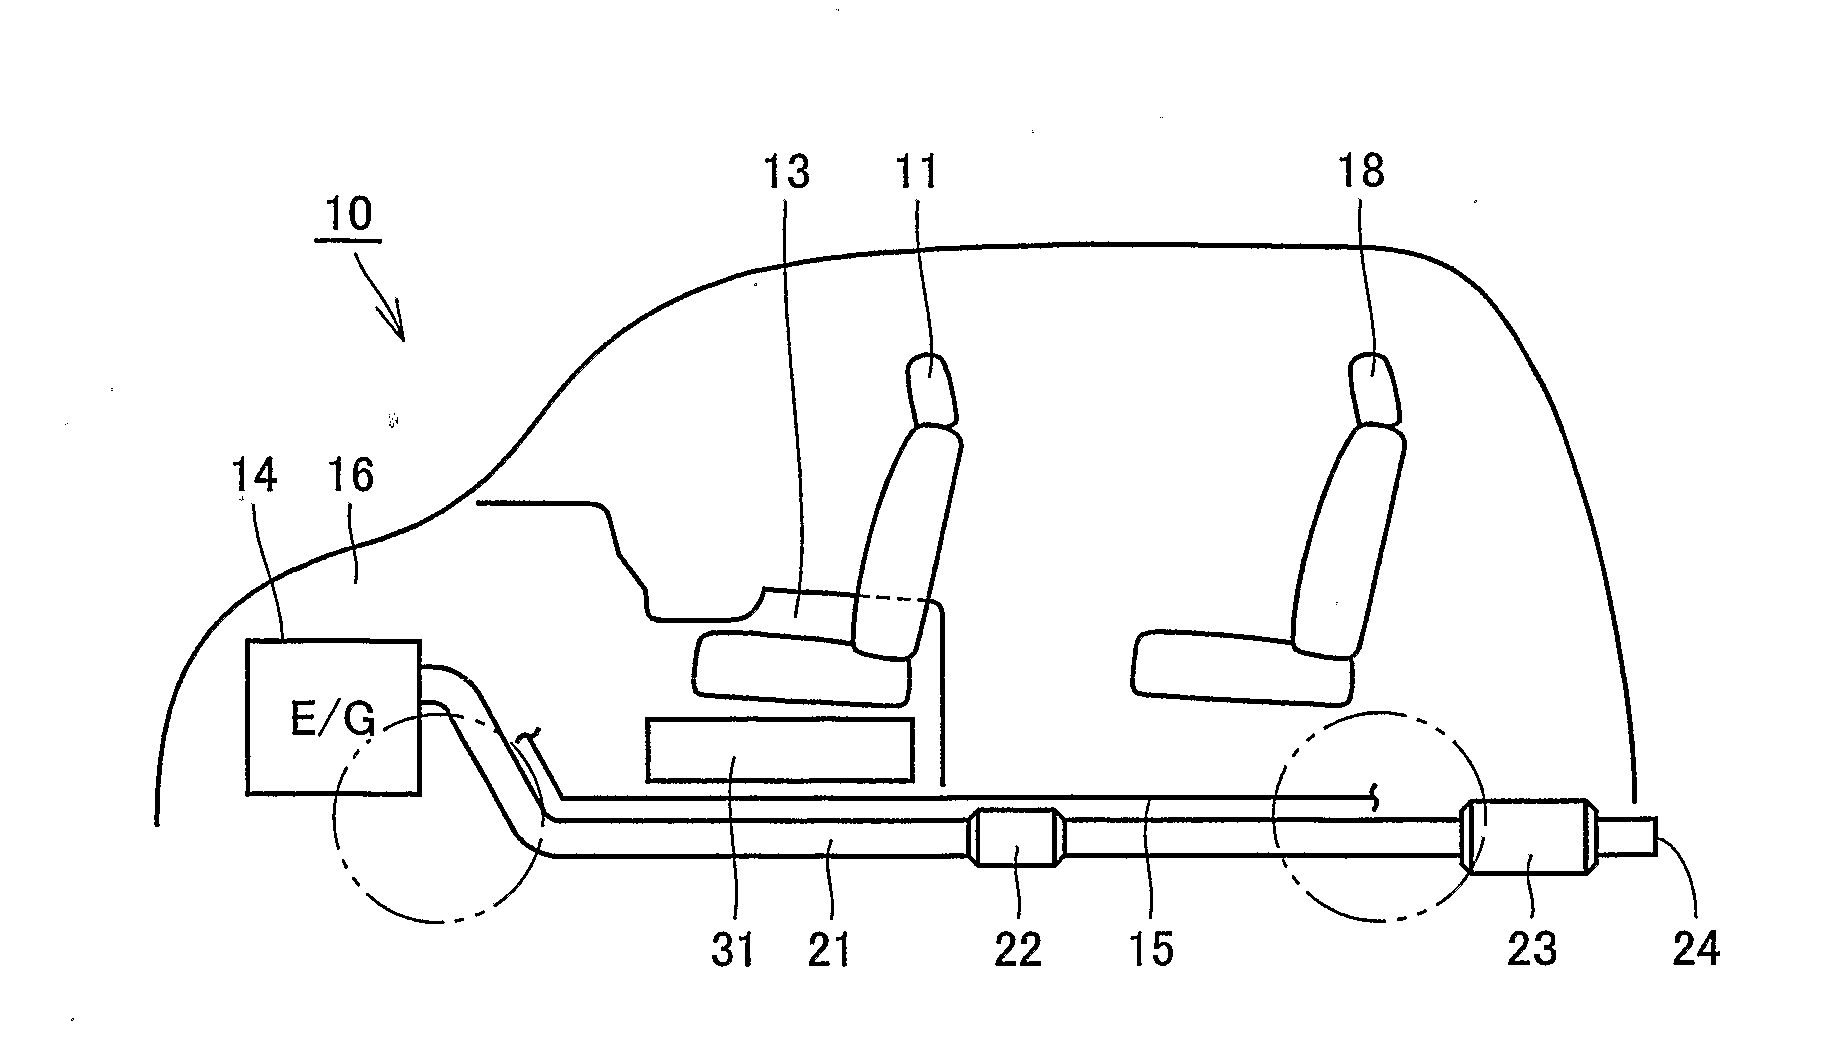 Structure of Hybrid Vehicle